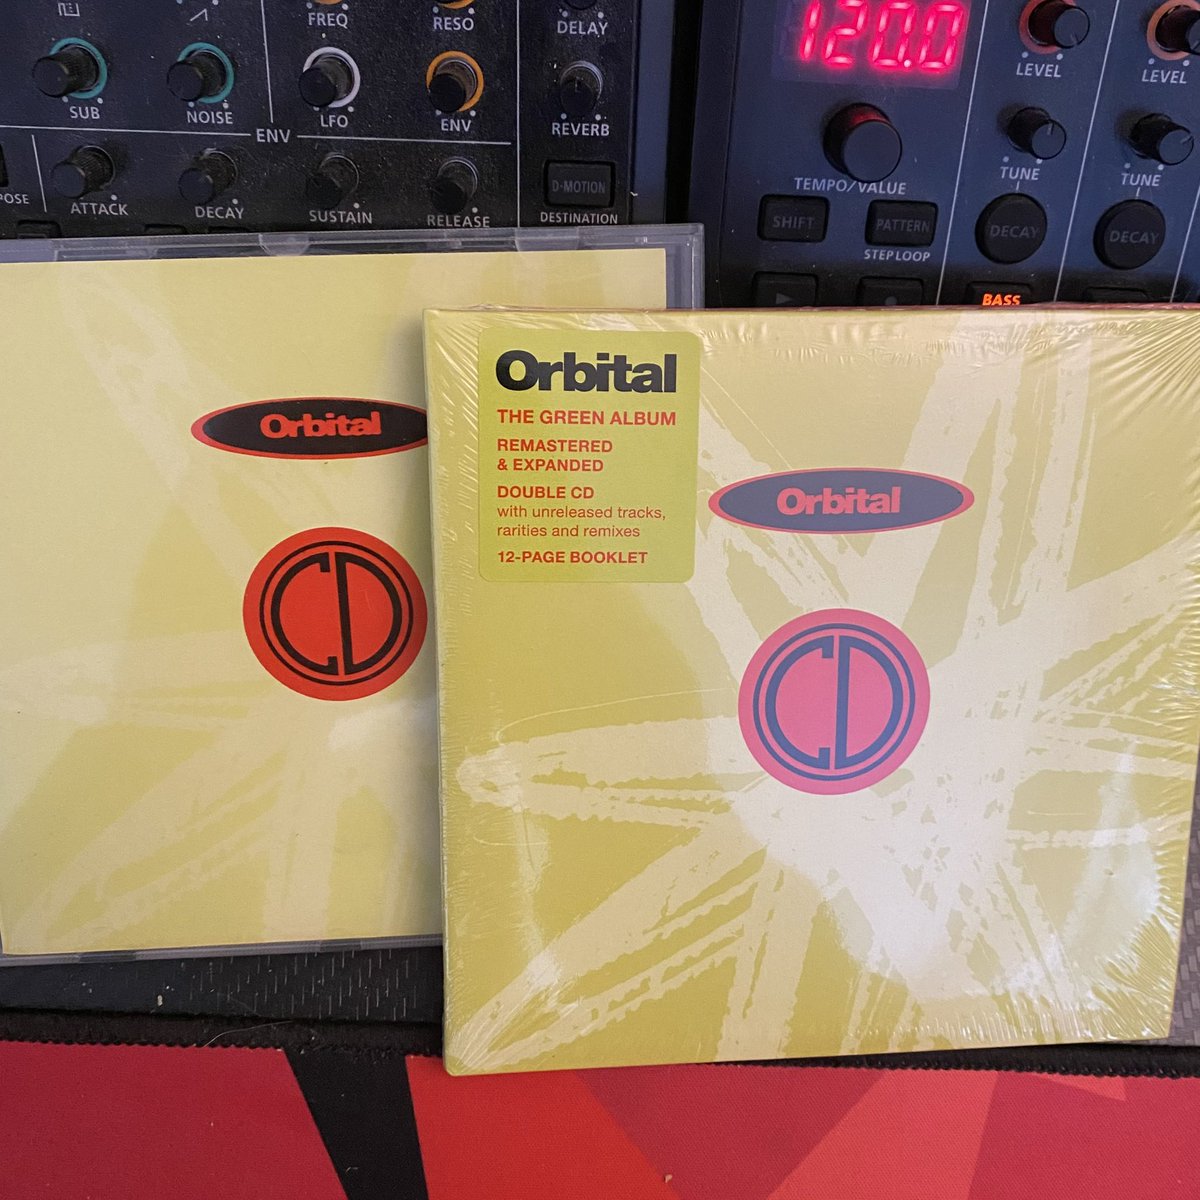 This CD I bought in 1991 begins with the words “There is the theory of the Moebius , a twist in the fabric of space , where time becomes a loop” and sure enough , 33 years later, here I am buying the same CD again 🤯😂 @orbitalband knew ! 😁